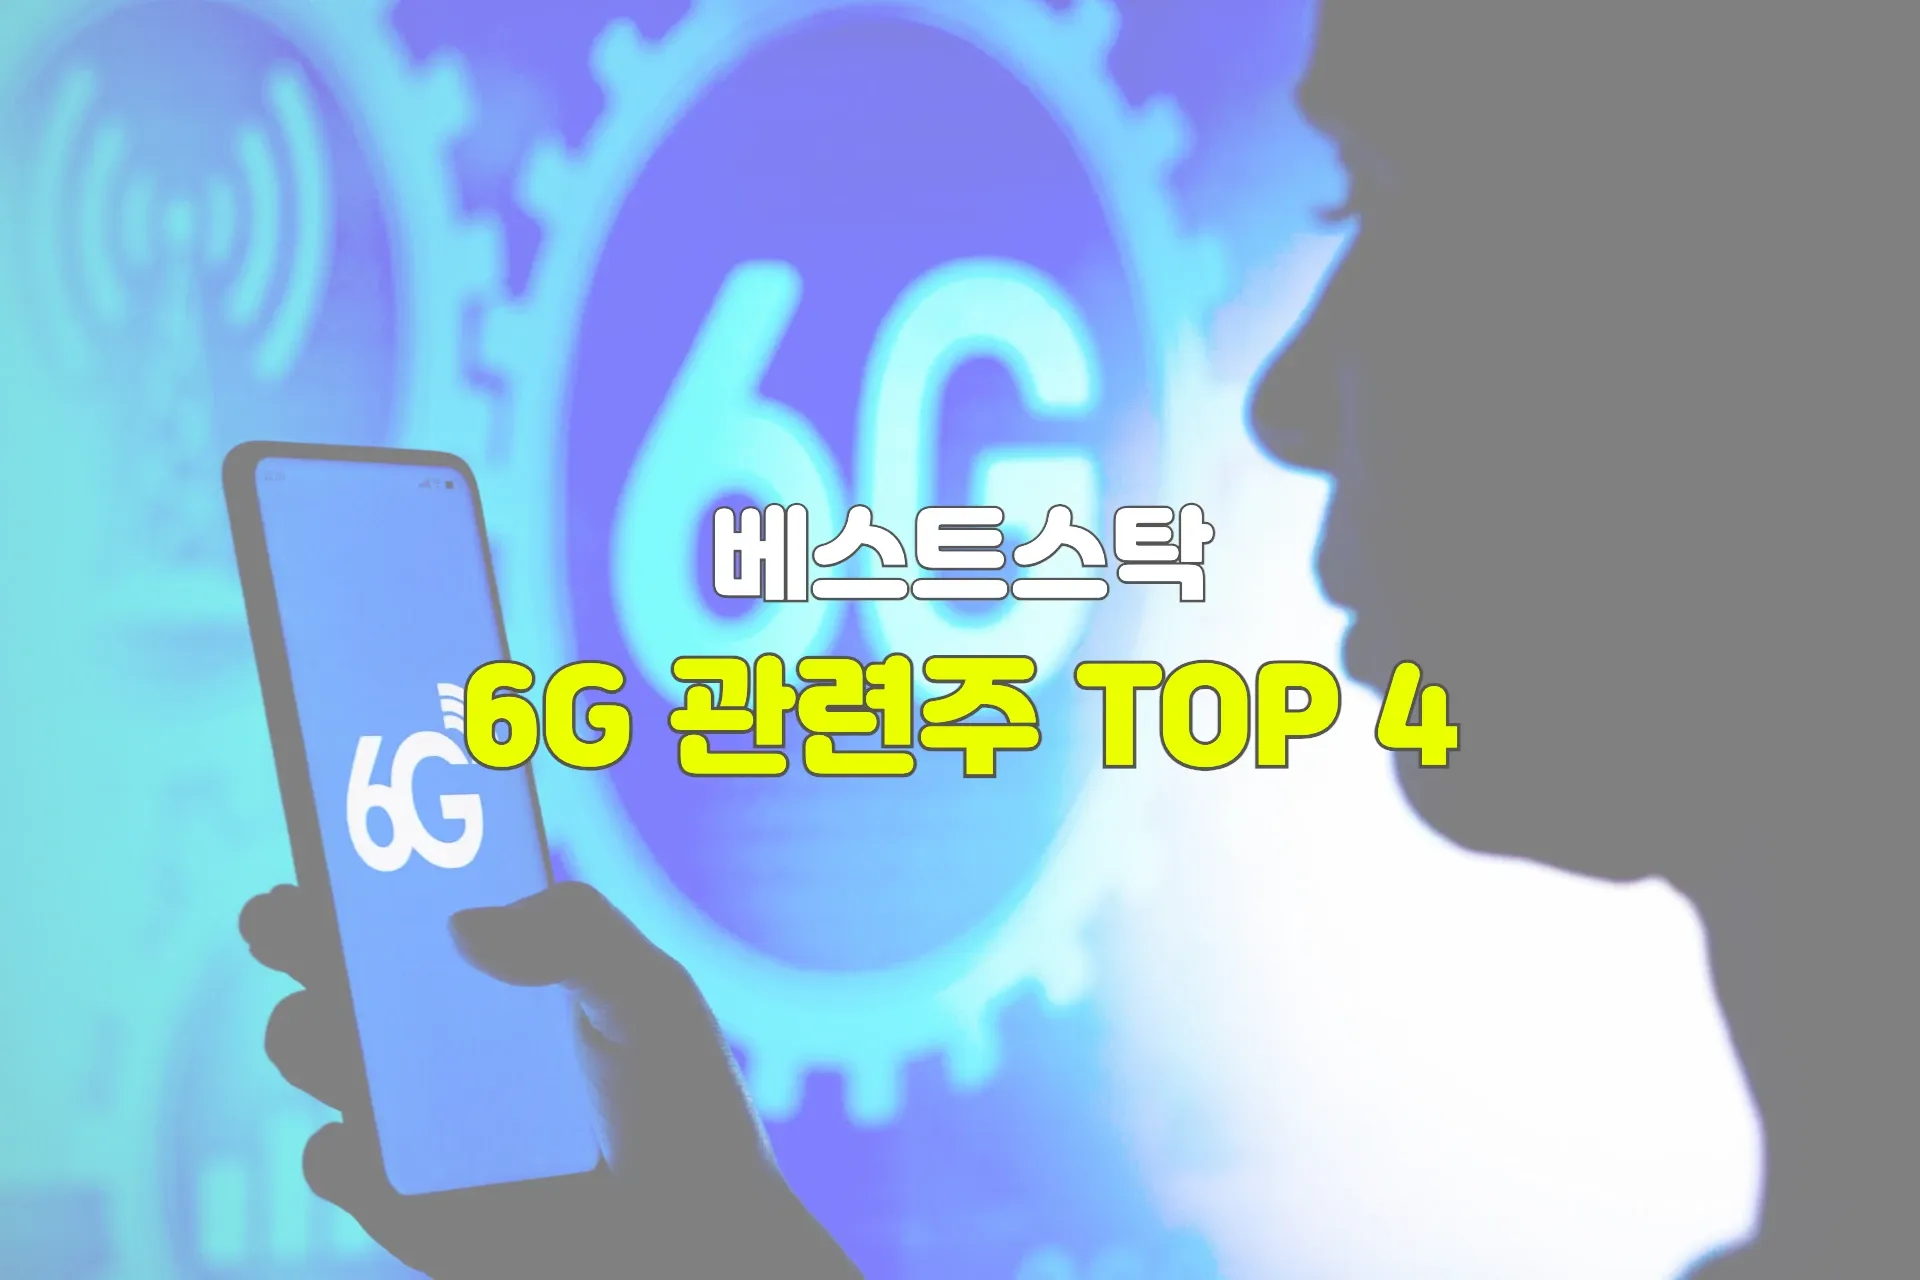 6G 관련주 TOP 4 썸네일